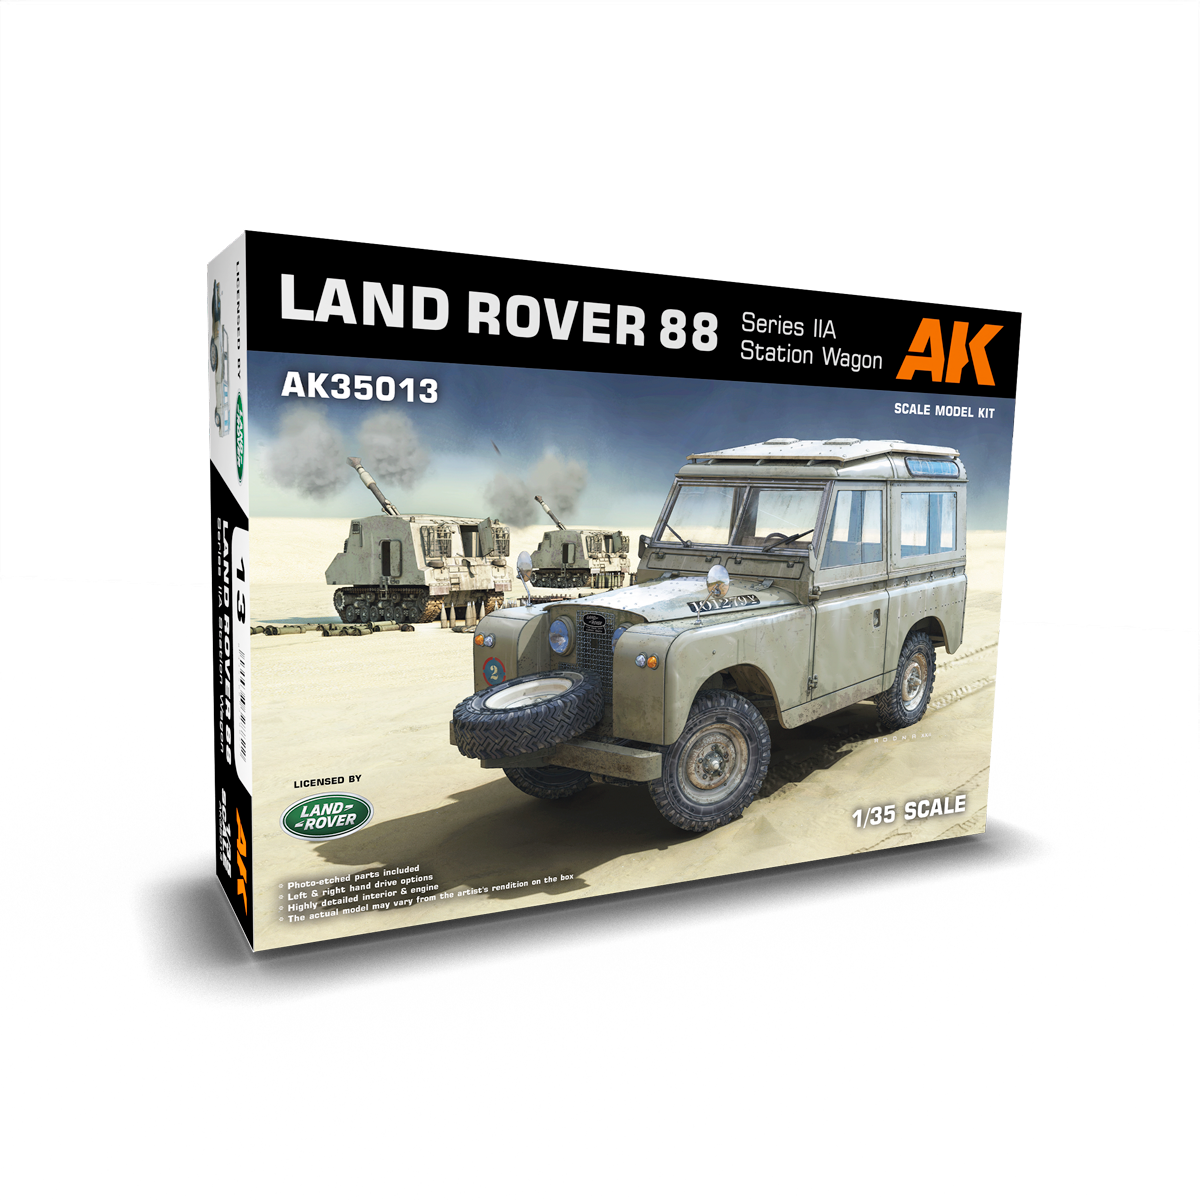 Land Rover 88 Series IIA Station Wagon - 1/35 Scale - Loaded Dice Barry Vale of Glamorgan CF64 3HD